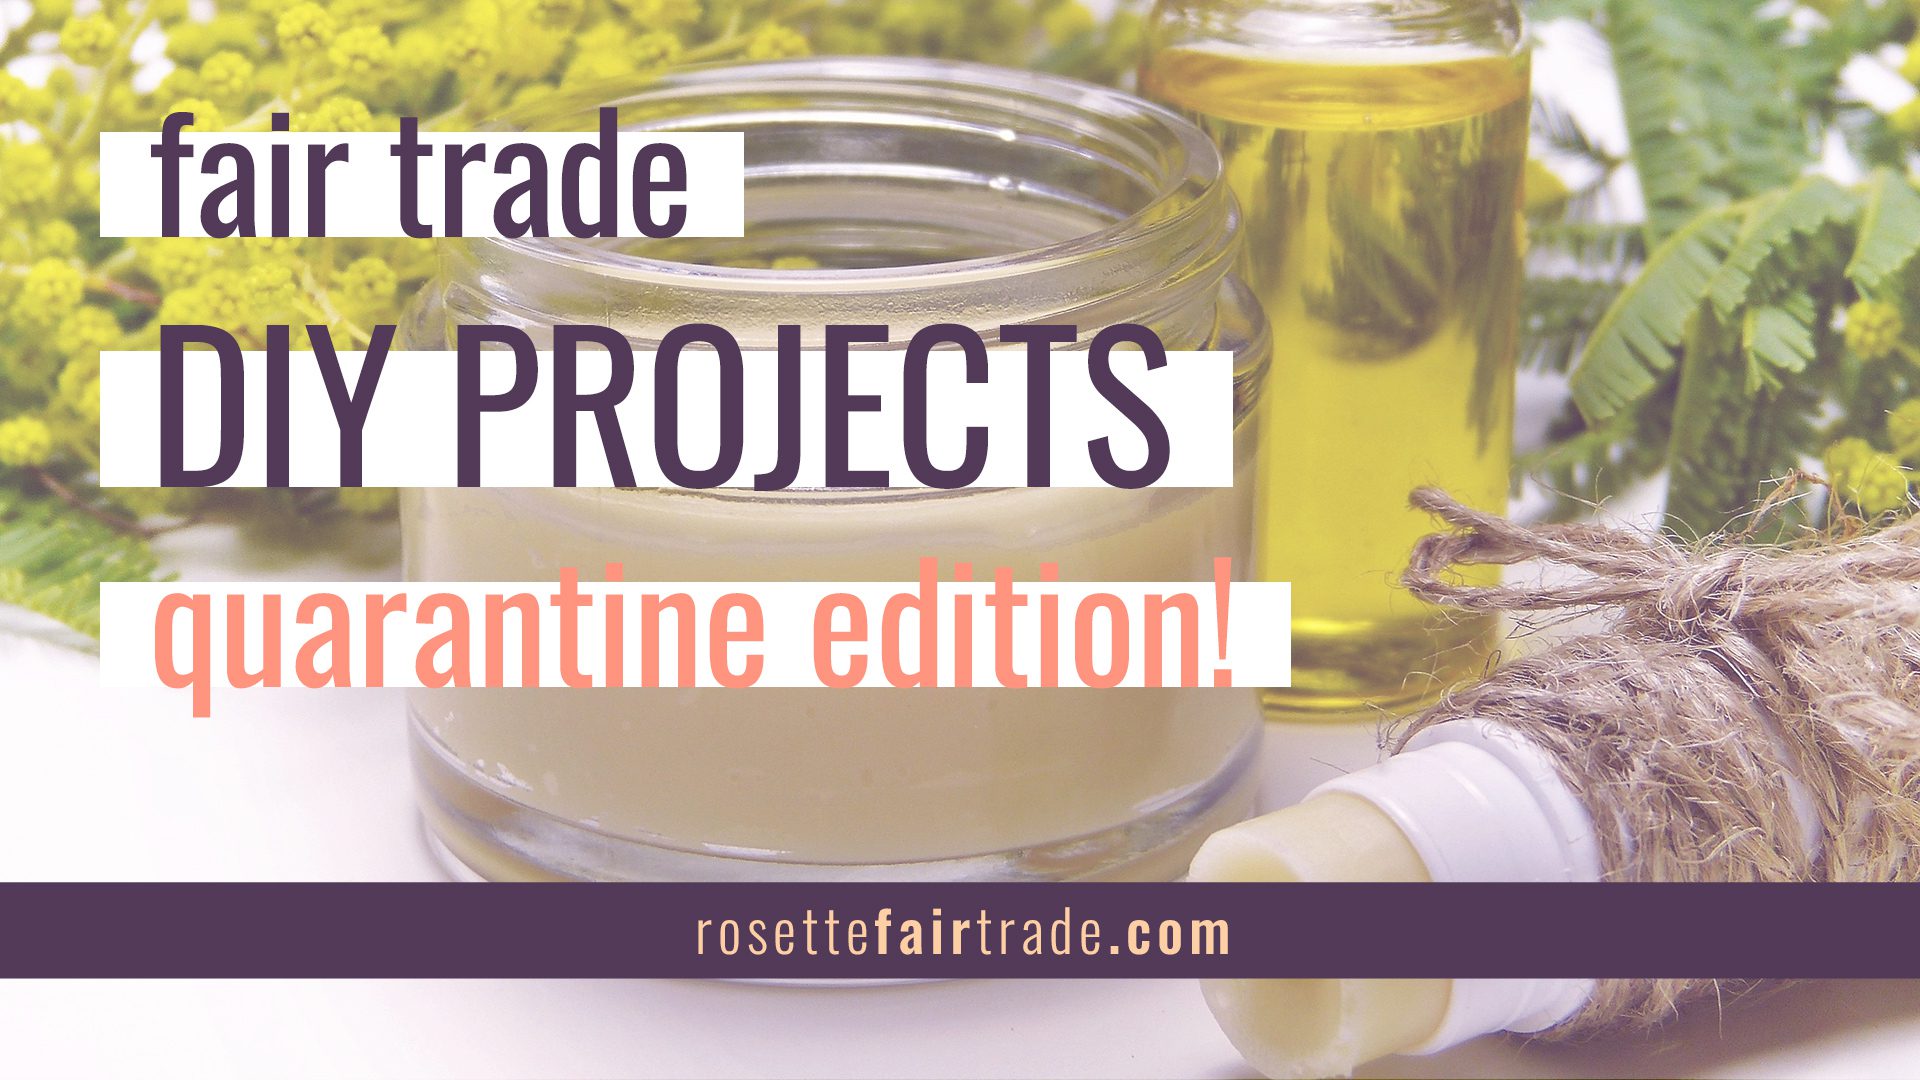 Fair trade DIY projects quarantine edition on the Rosette Network